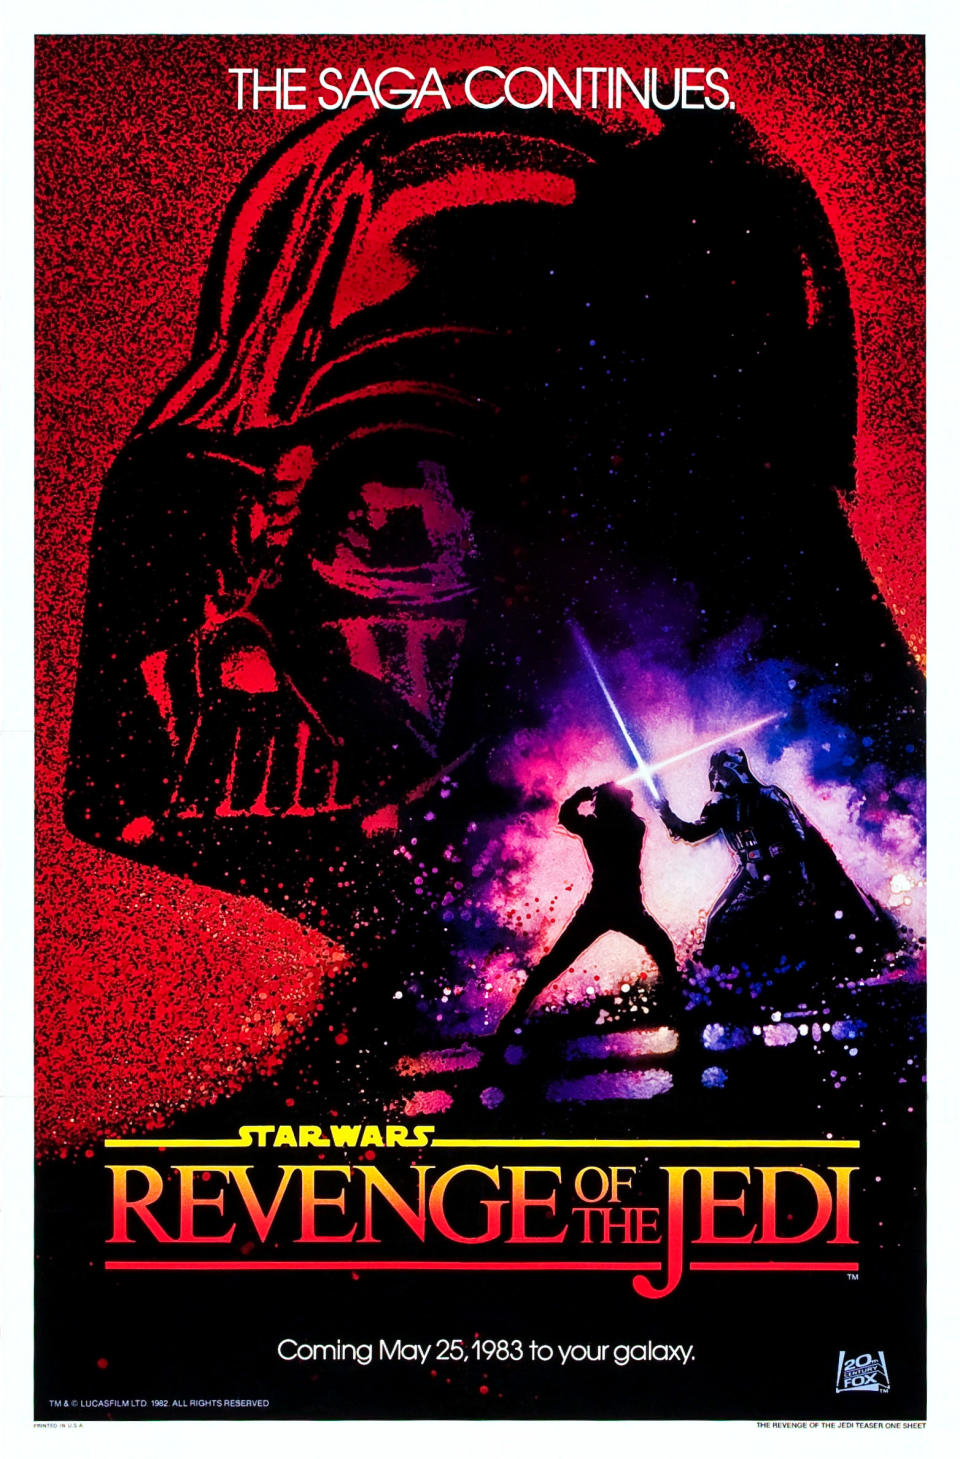 Movie poster for "Star Wars: Revenge of the Jedi" showing a duel between two characters with lightsabers and the text, "The Saga Continues. Coming May 25, 1983."